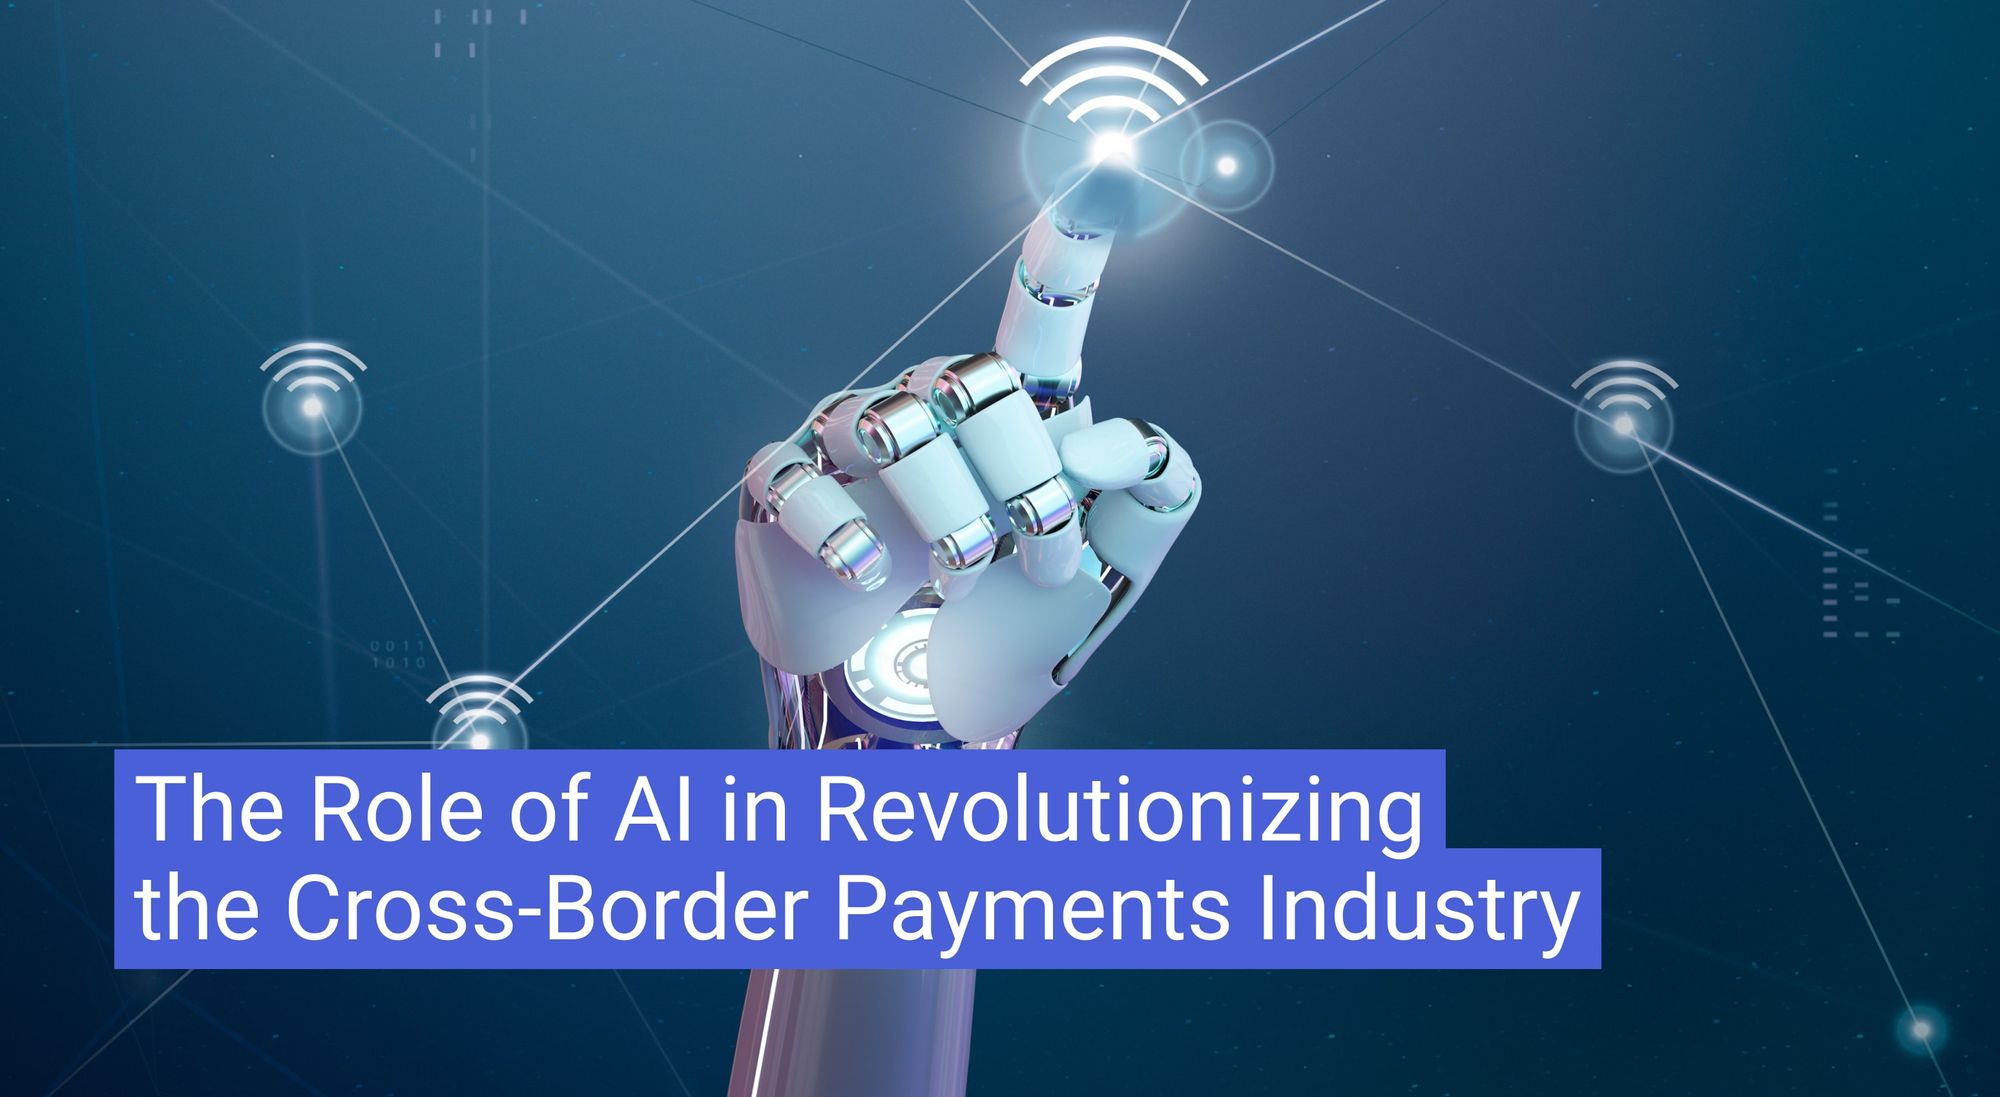 The Role of AI in Revolutionizing the Cross-Border Payments Industry